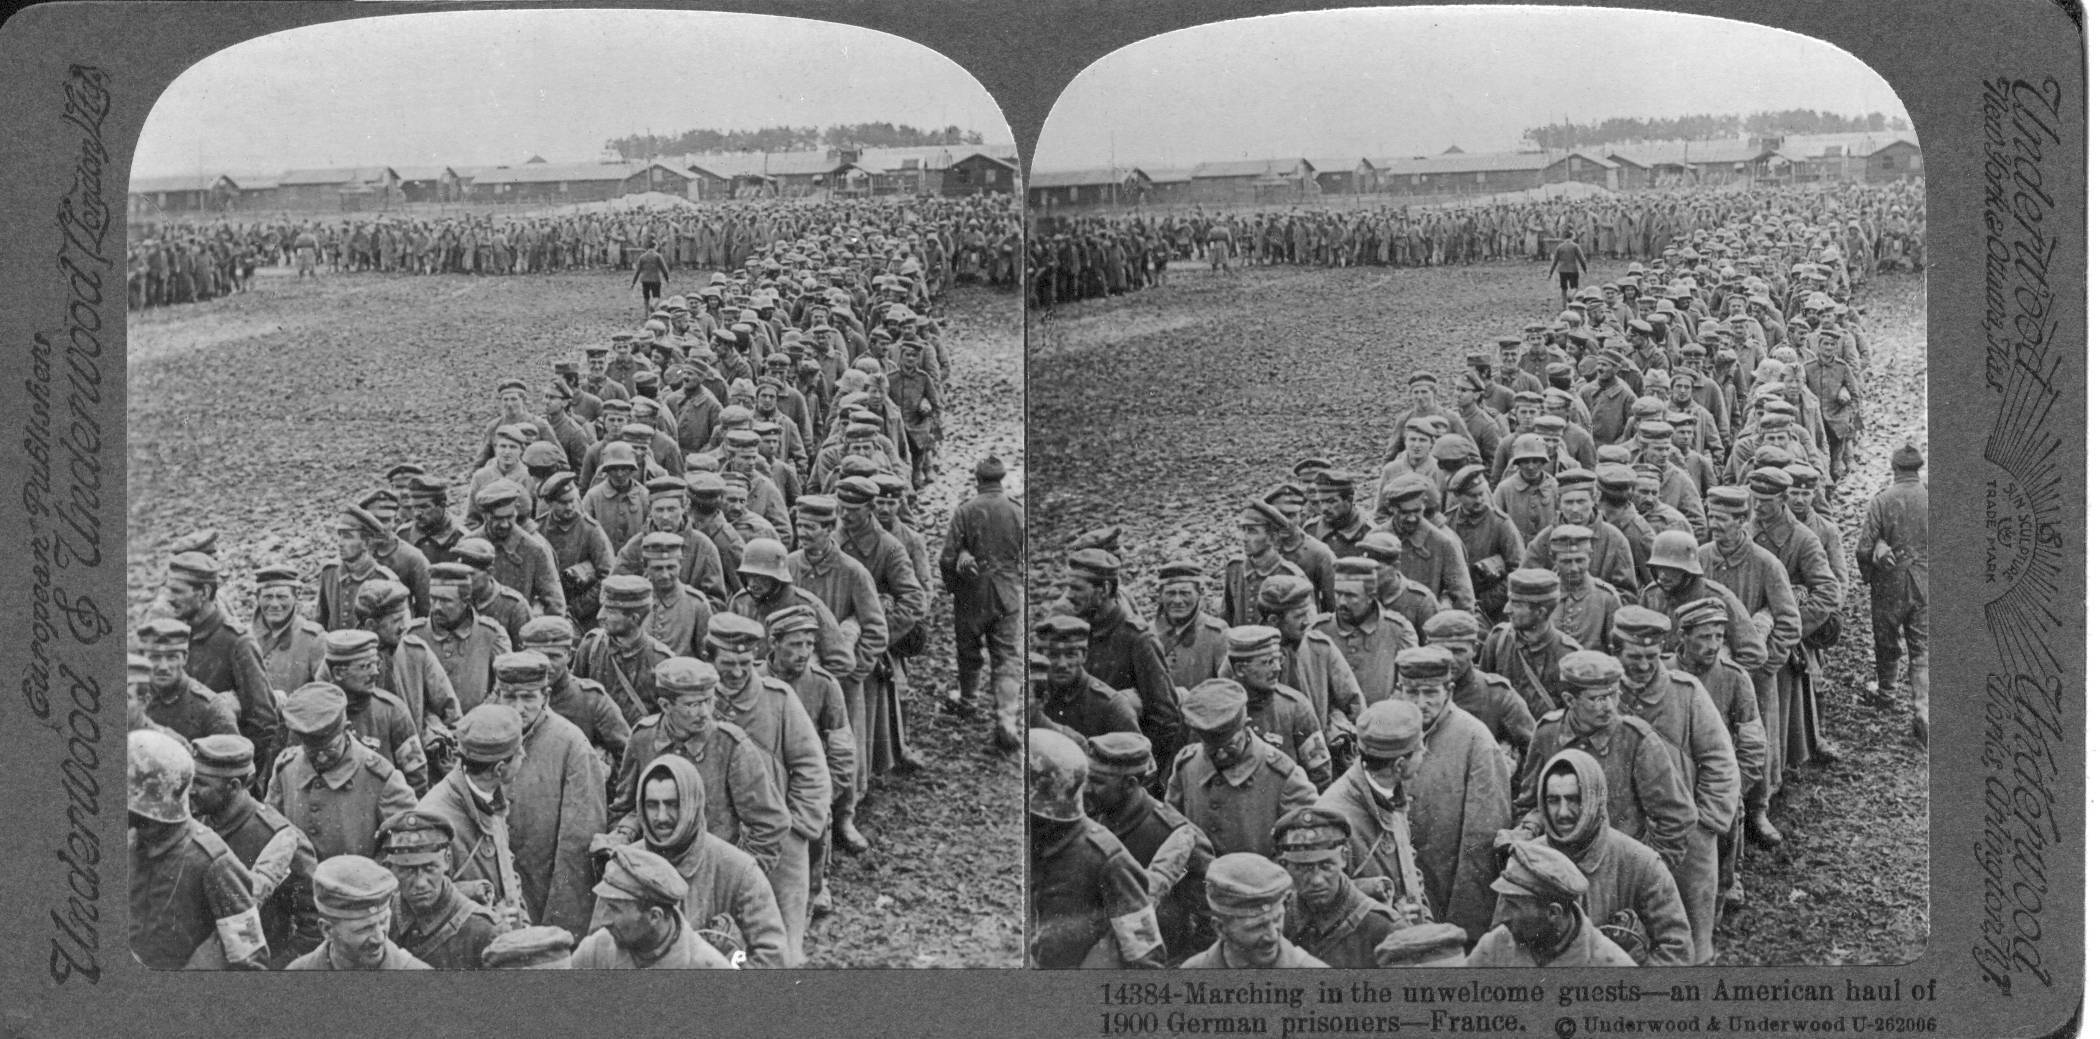 Marching in the unwelcome guests--an American haul of 1900 German prisoners, France